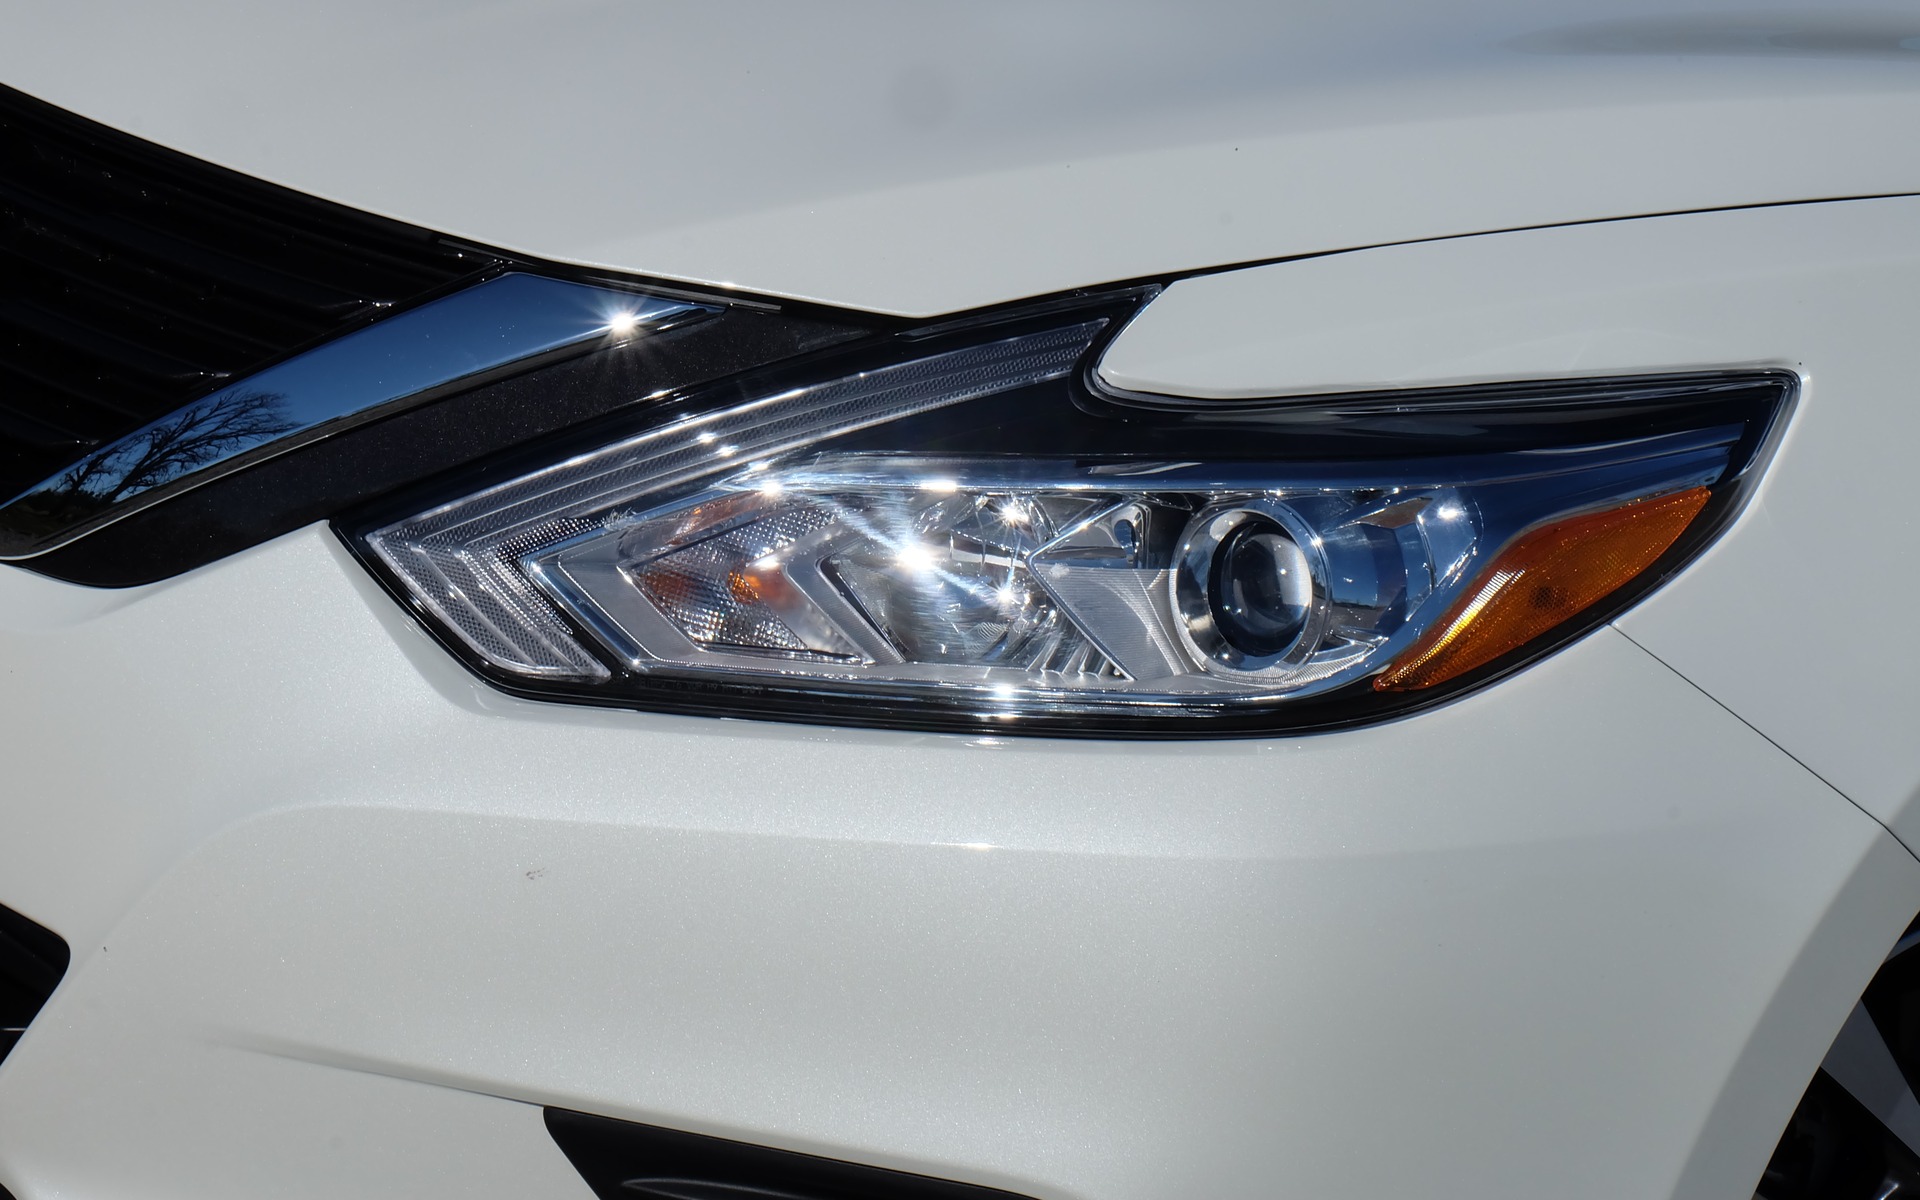 The Altima gets new boomerang-shaped headlight clusters